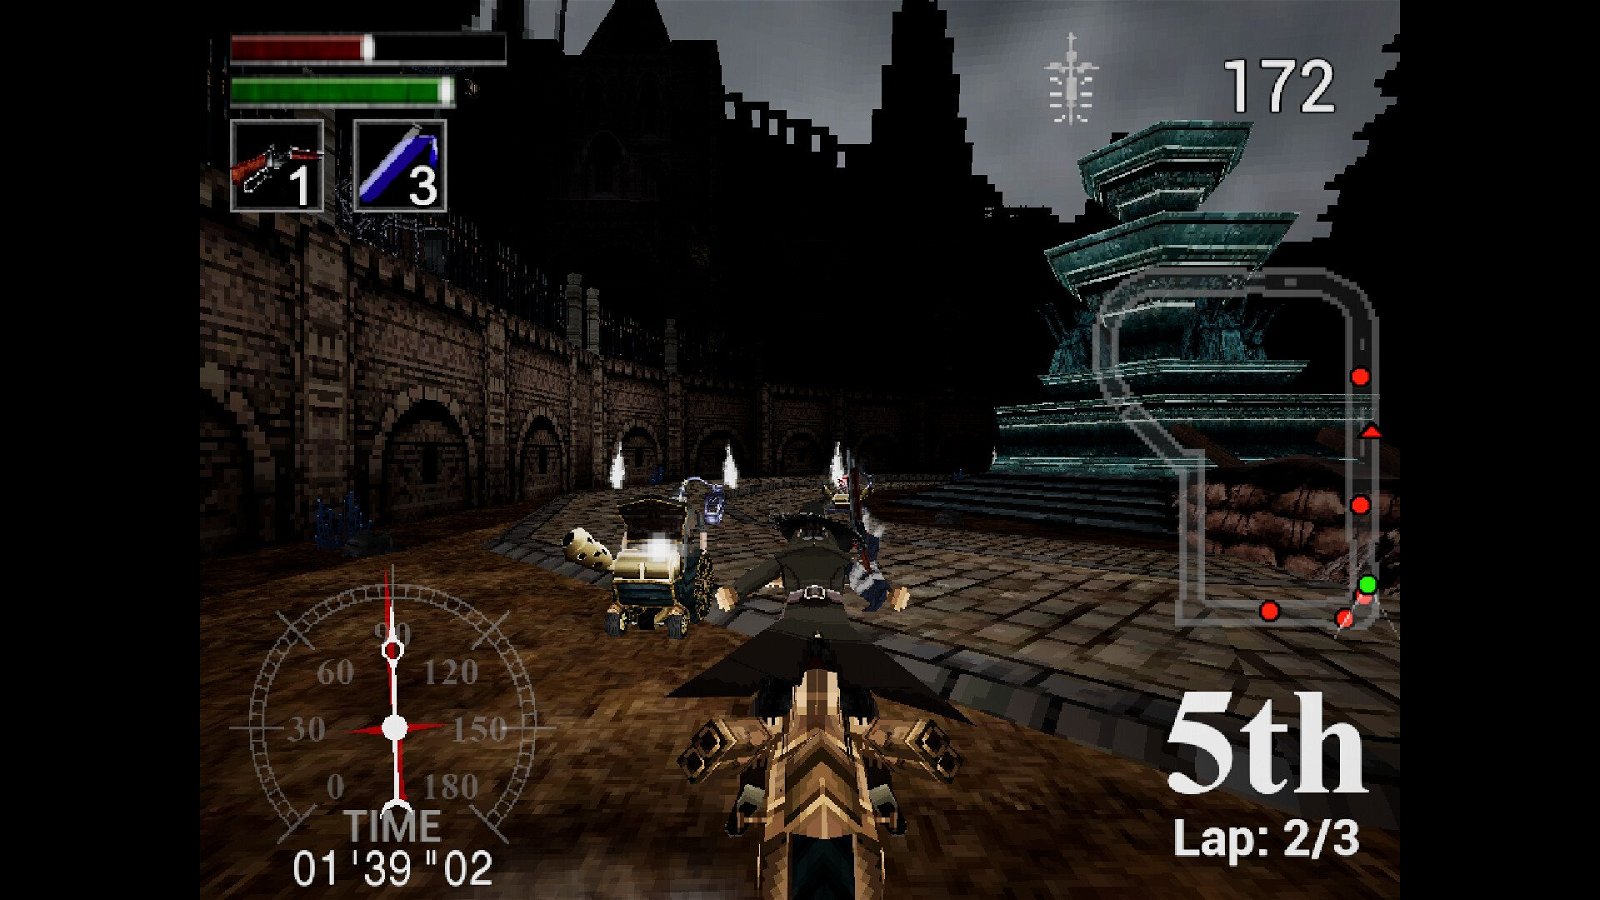 Remember Bloodborne Kart? It’s available today for free on Steam